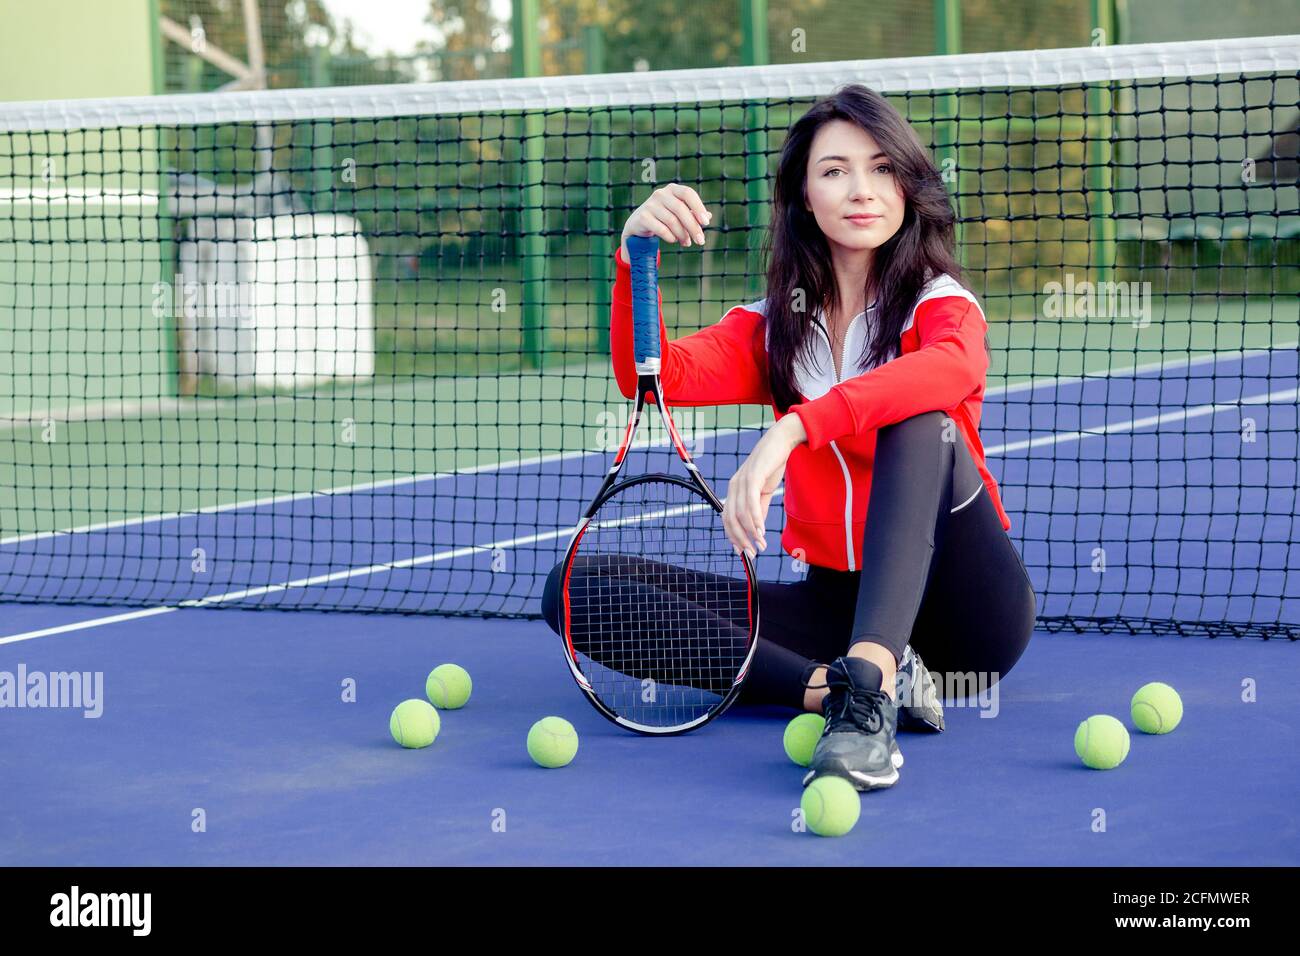 Young pretty woman sitting leaning on tennis net, resting relaxing after training. Portrait of sportswoman on tennis blue court. Healthy life. Stock Photo